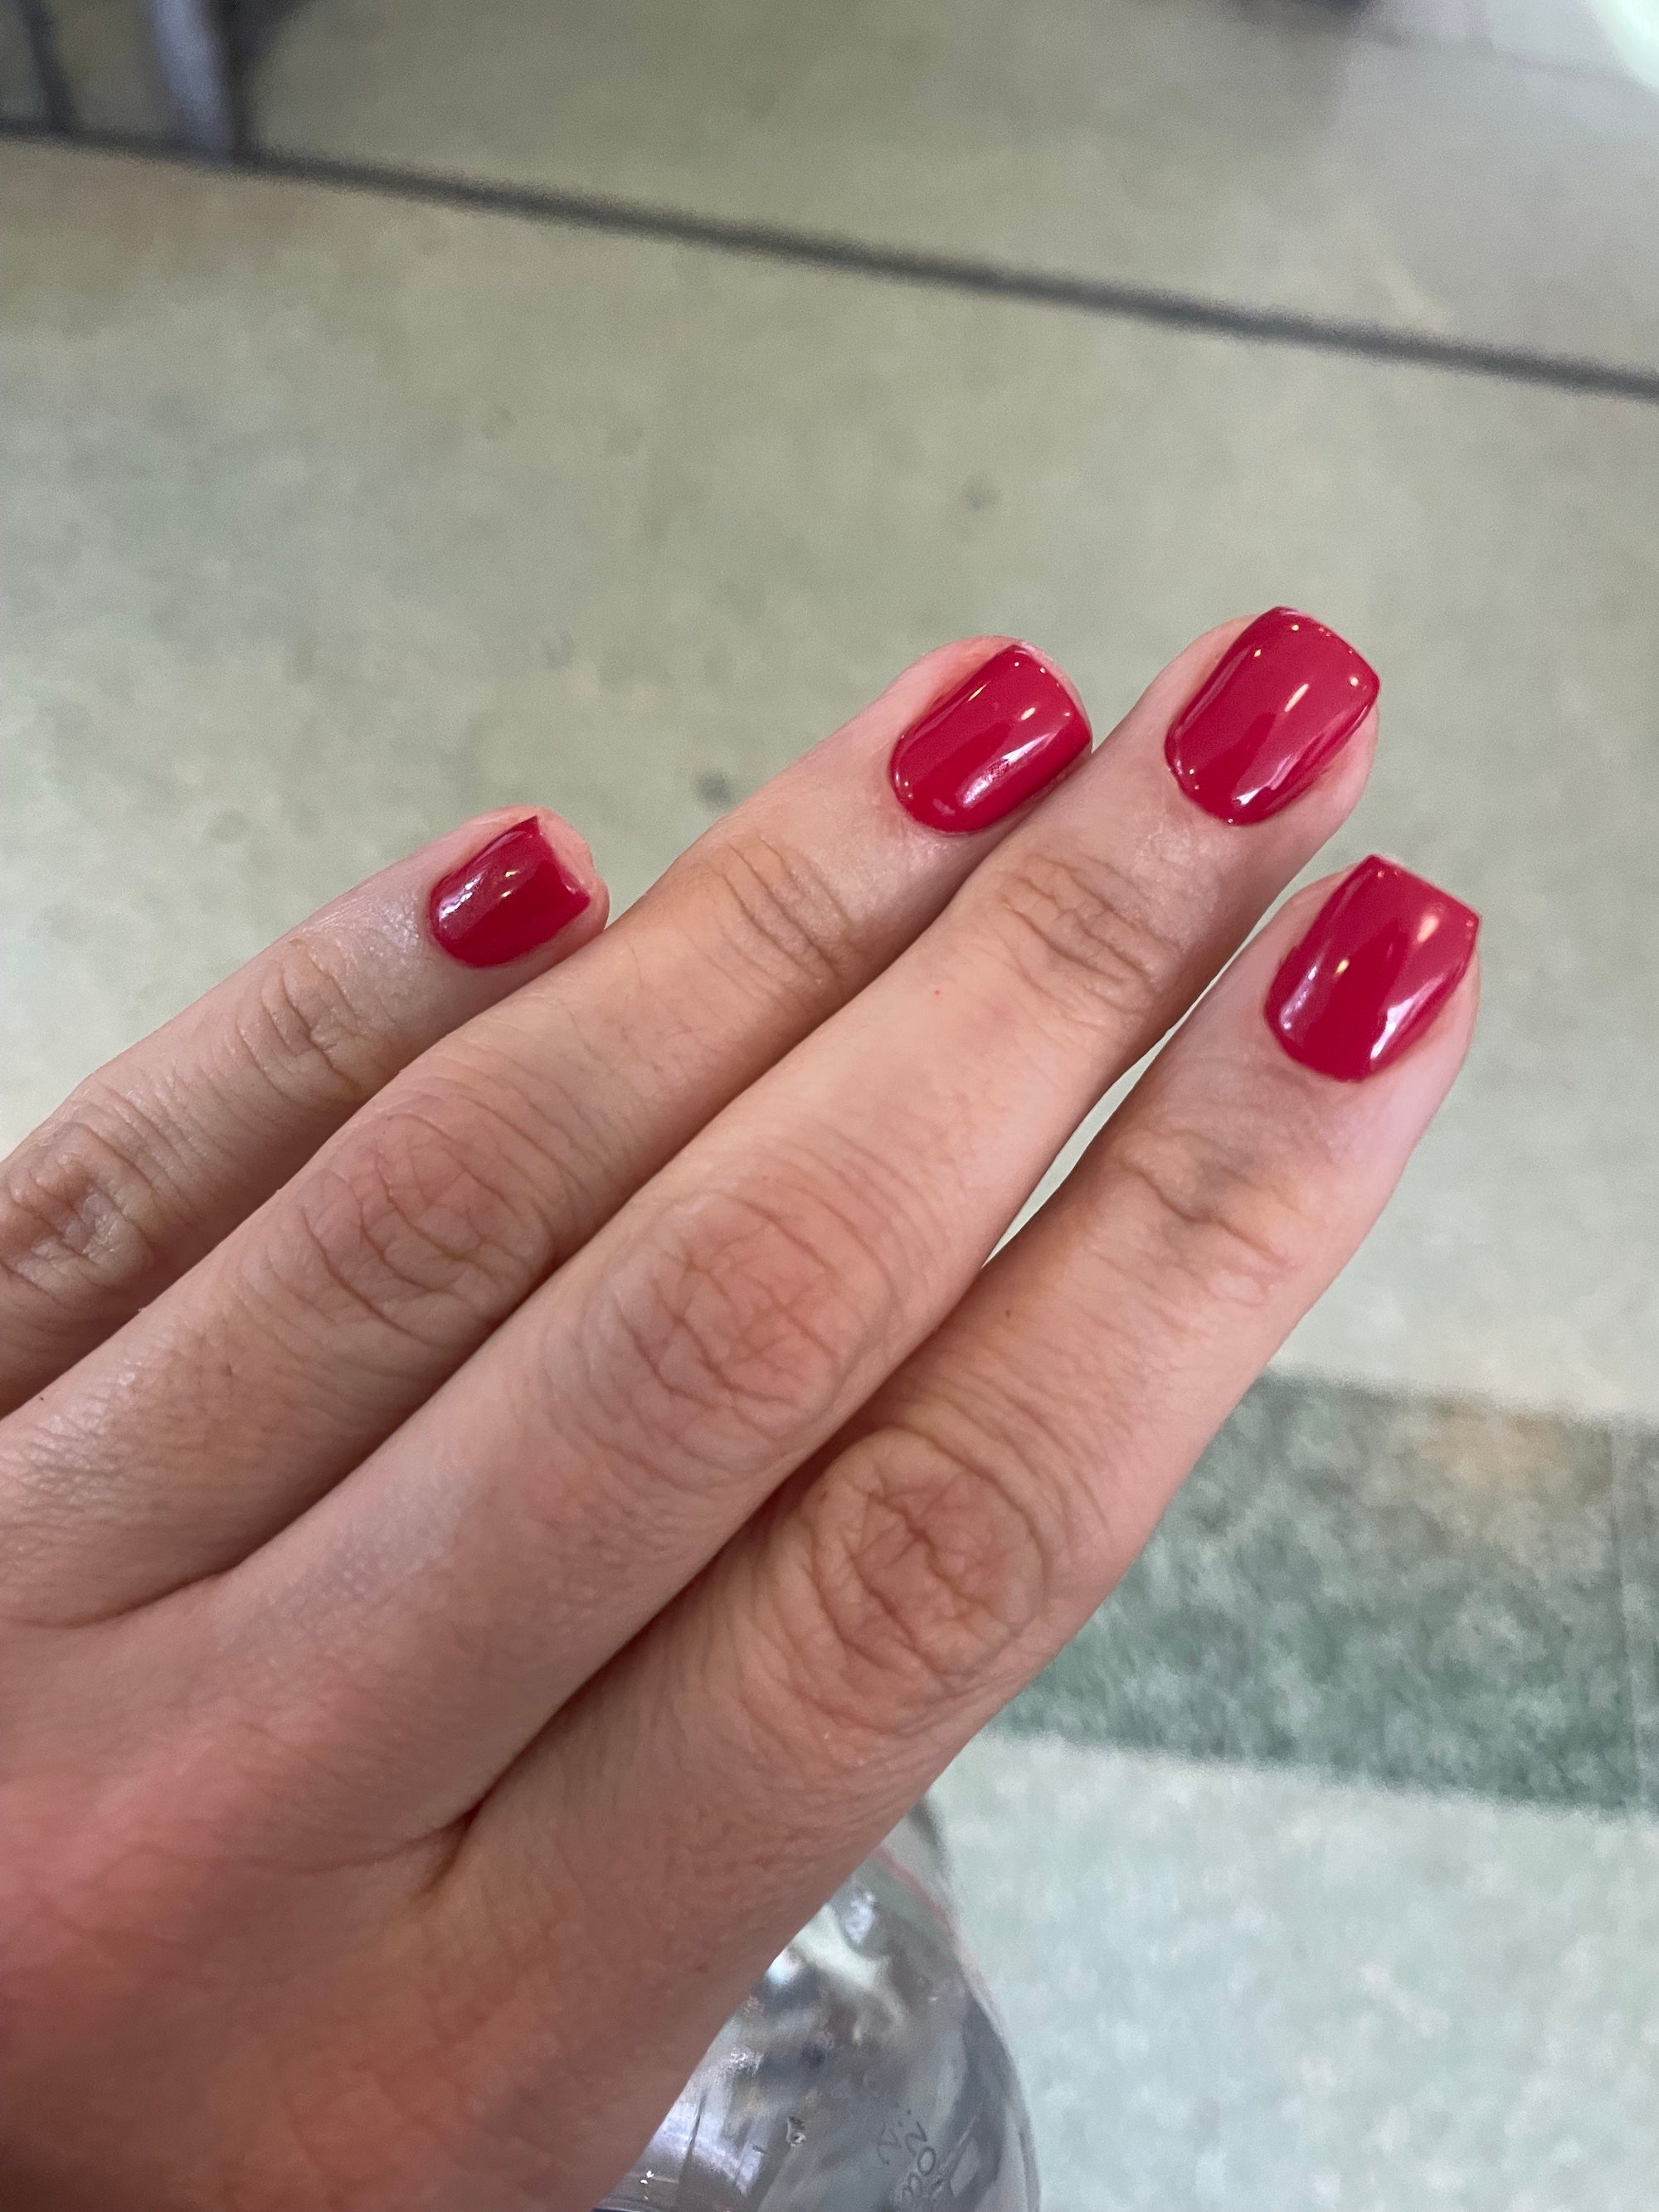 TikTok Loves The Russian Manicure, But There's A Catch